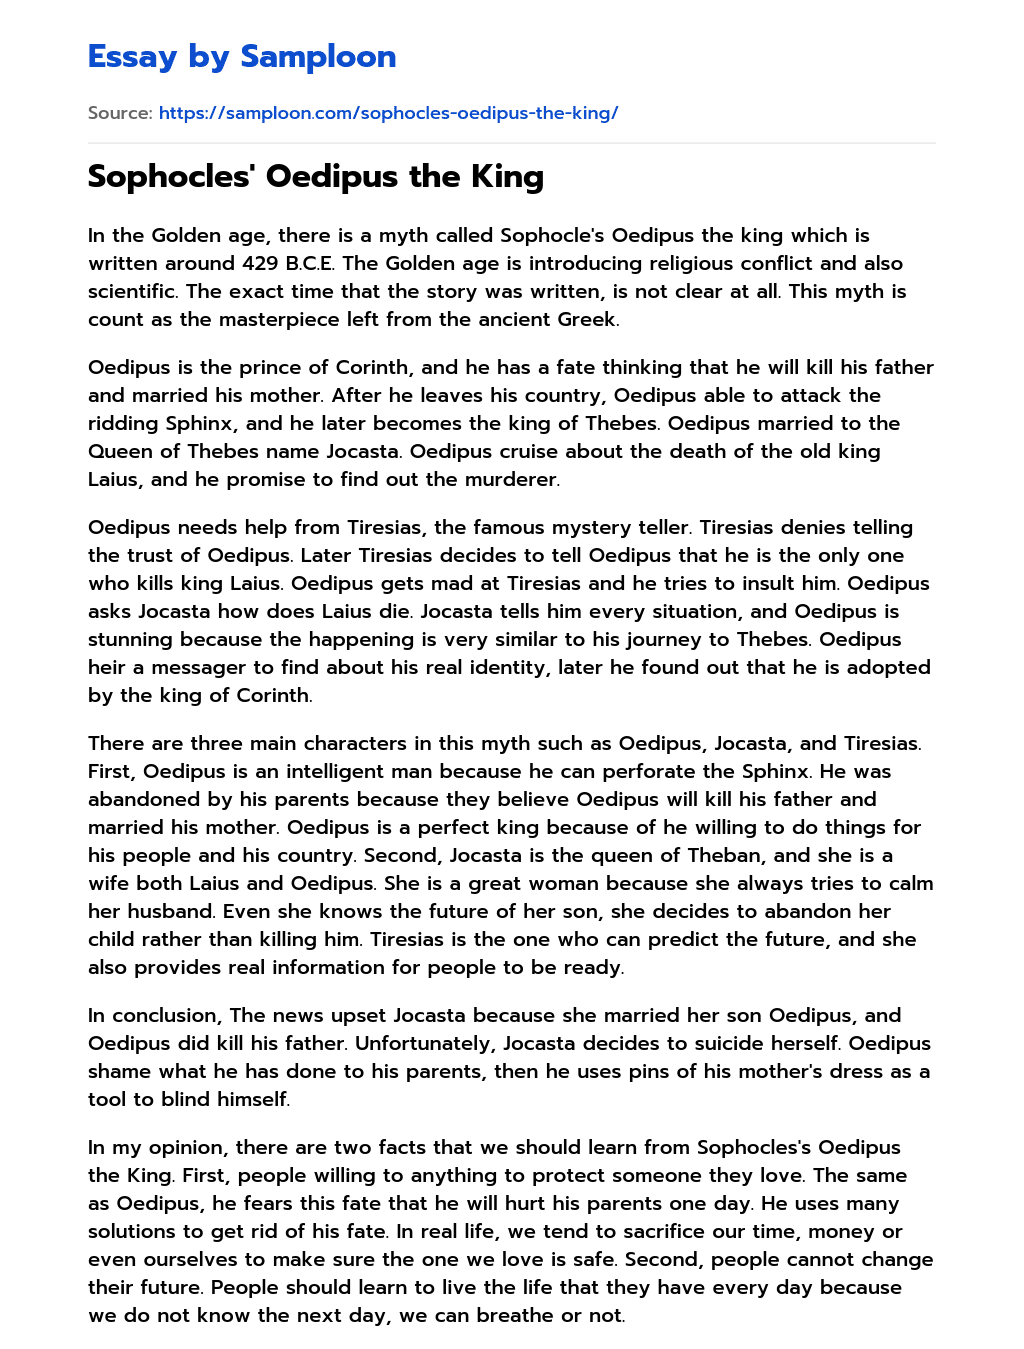 Sophocles’ Oedipus the King essay